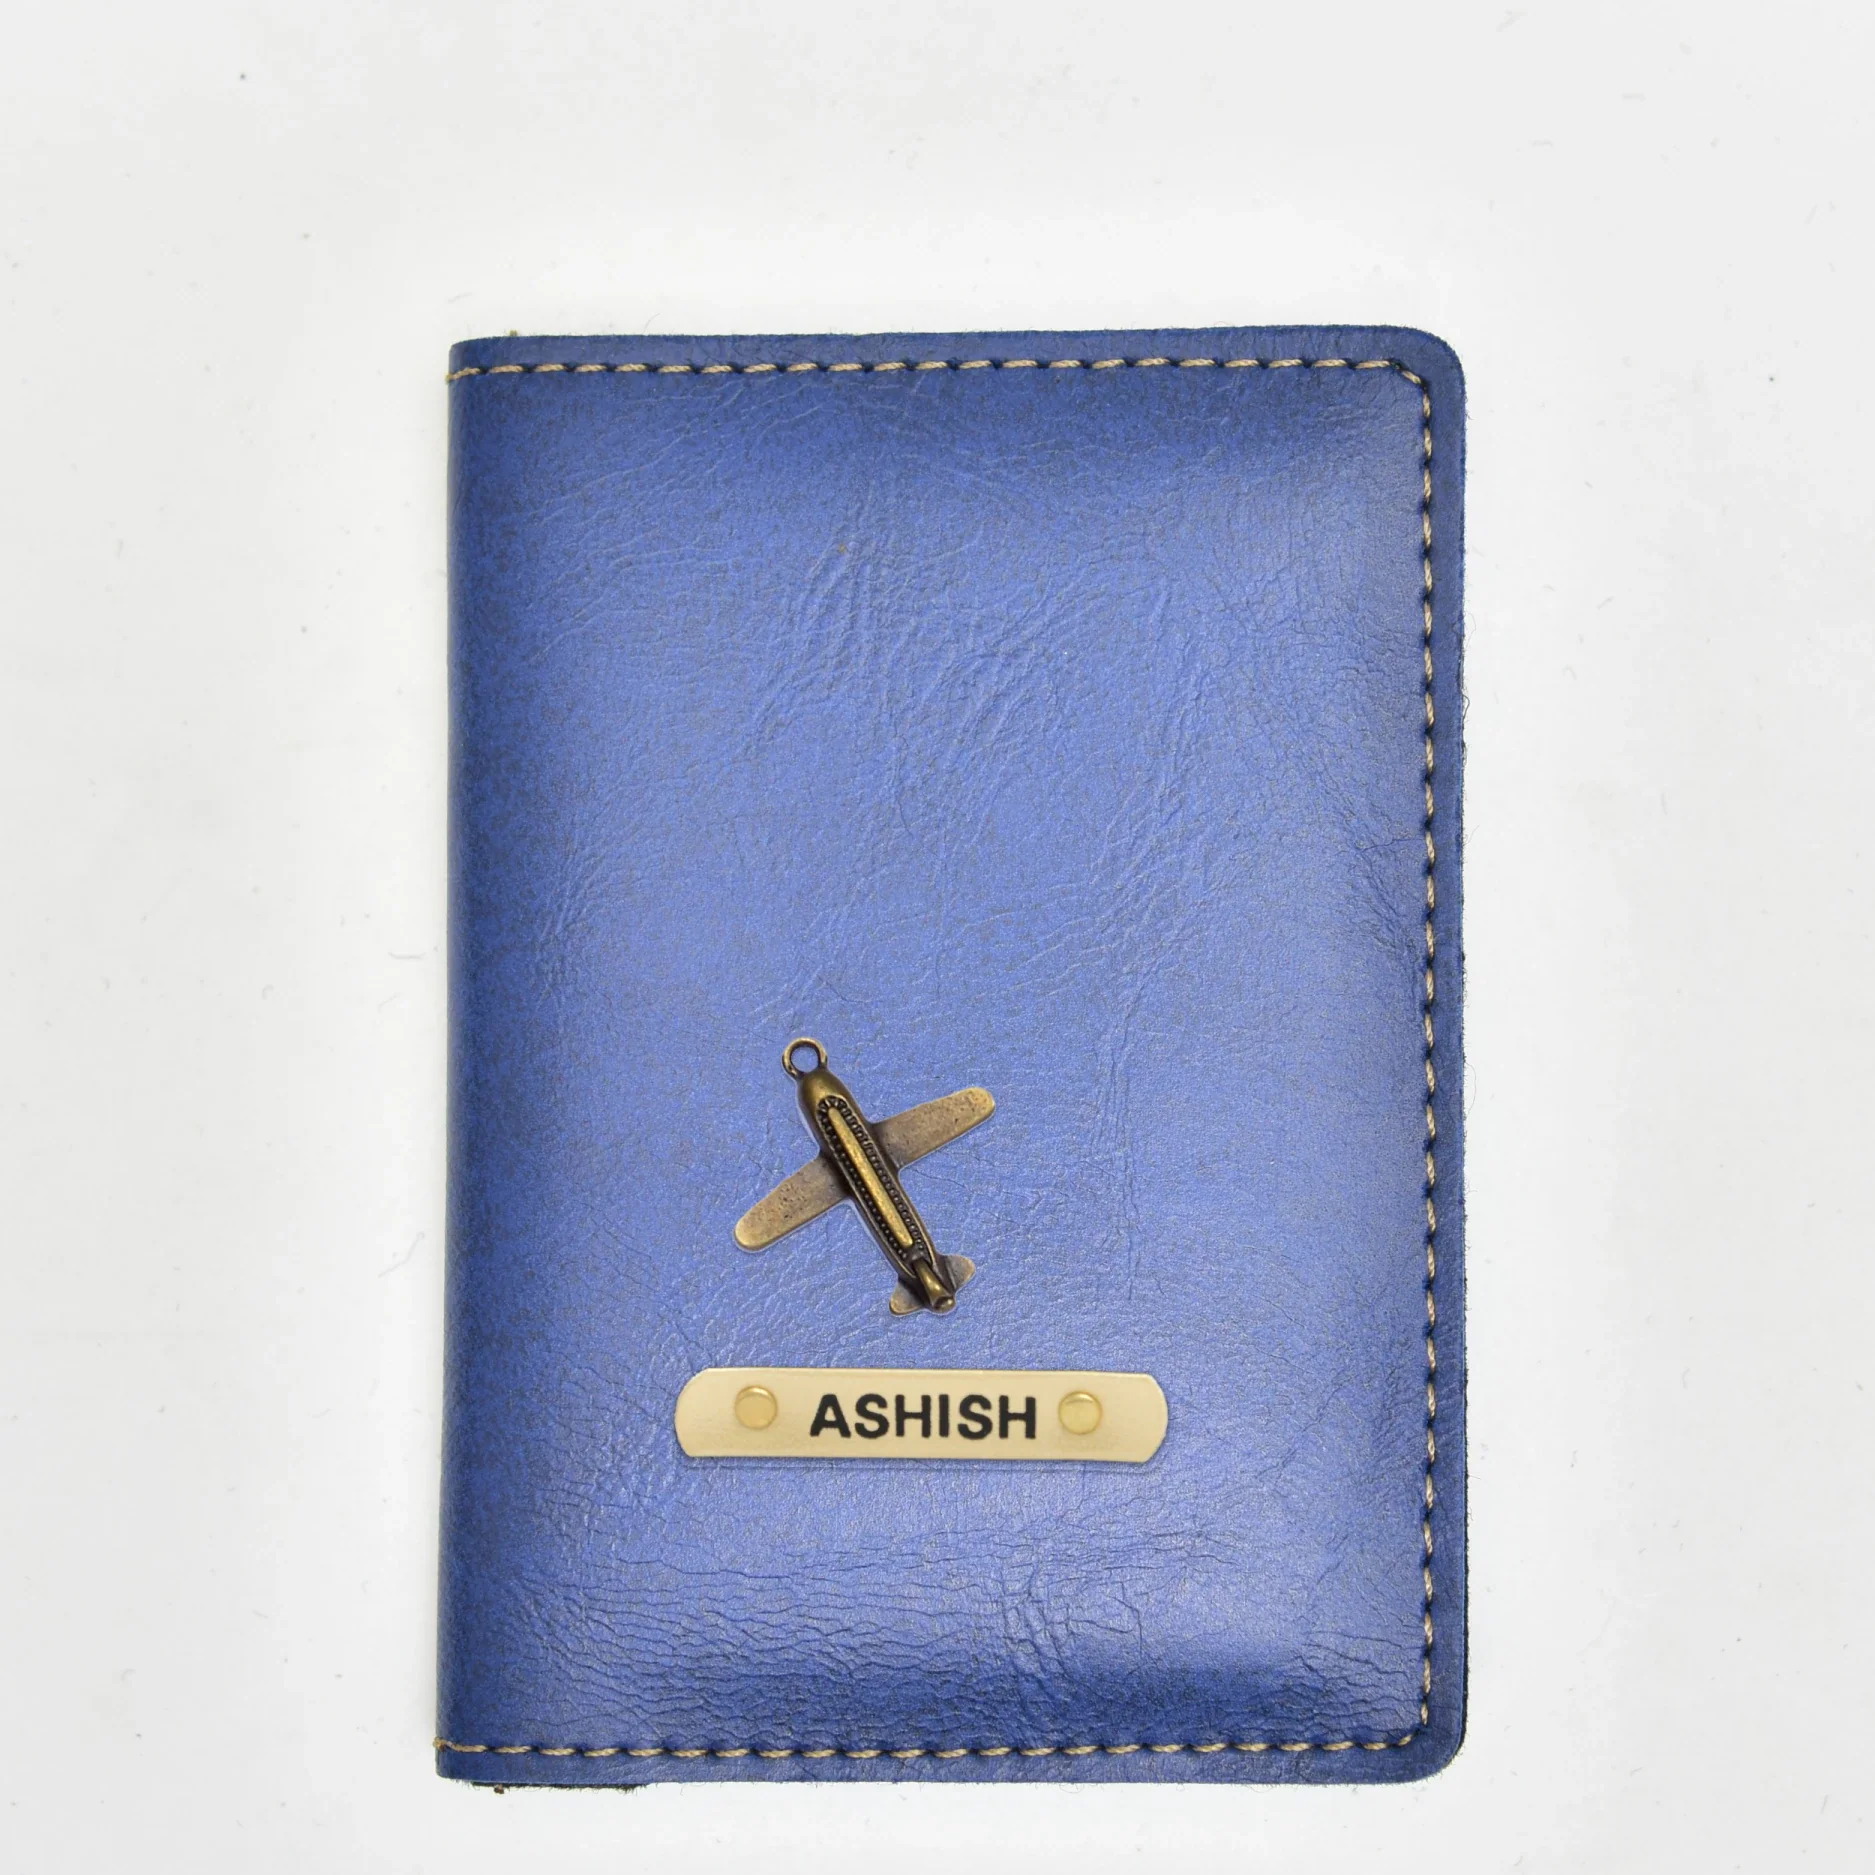 Make a lasting impression with a custom-made leather passport case that showcases your refined taste.